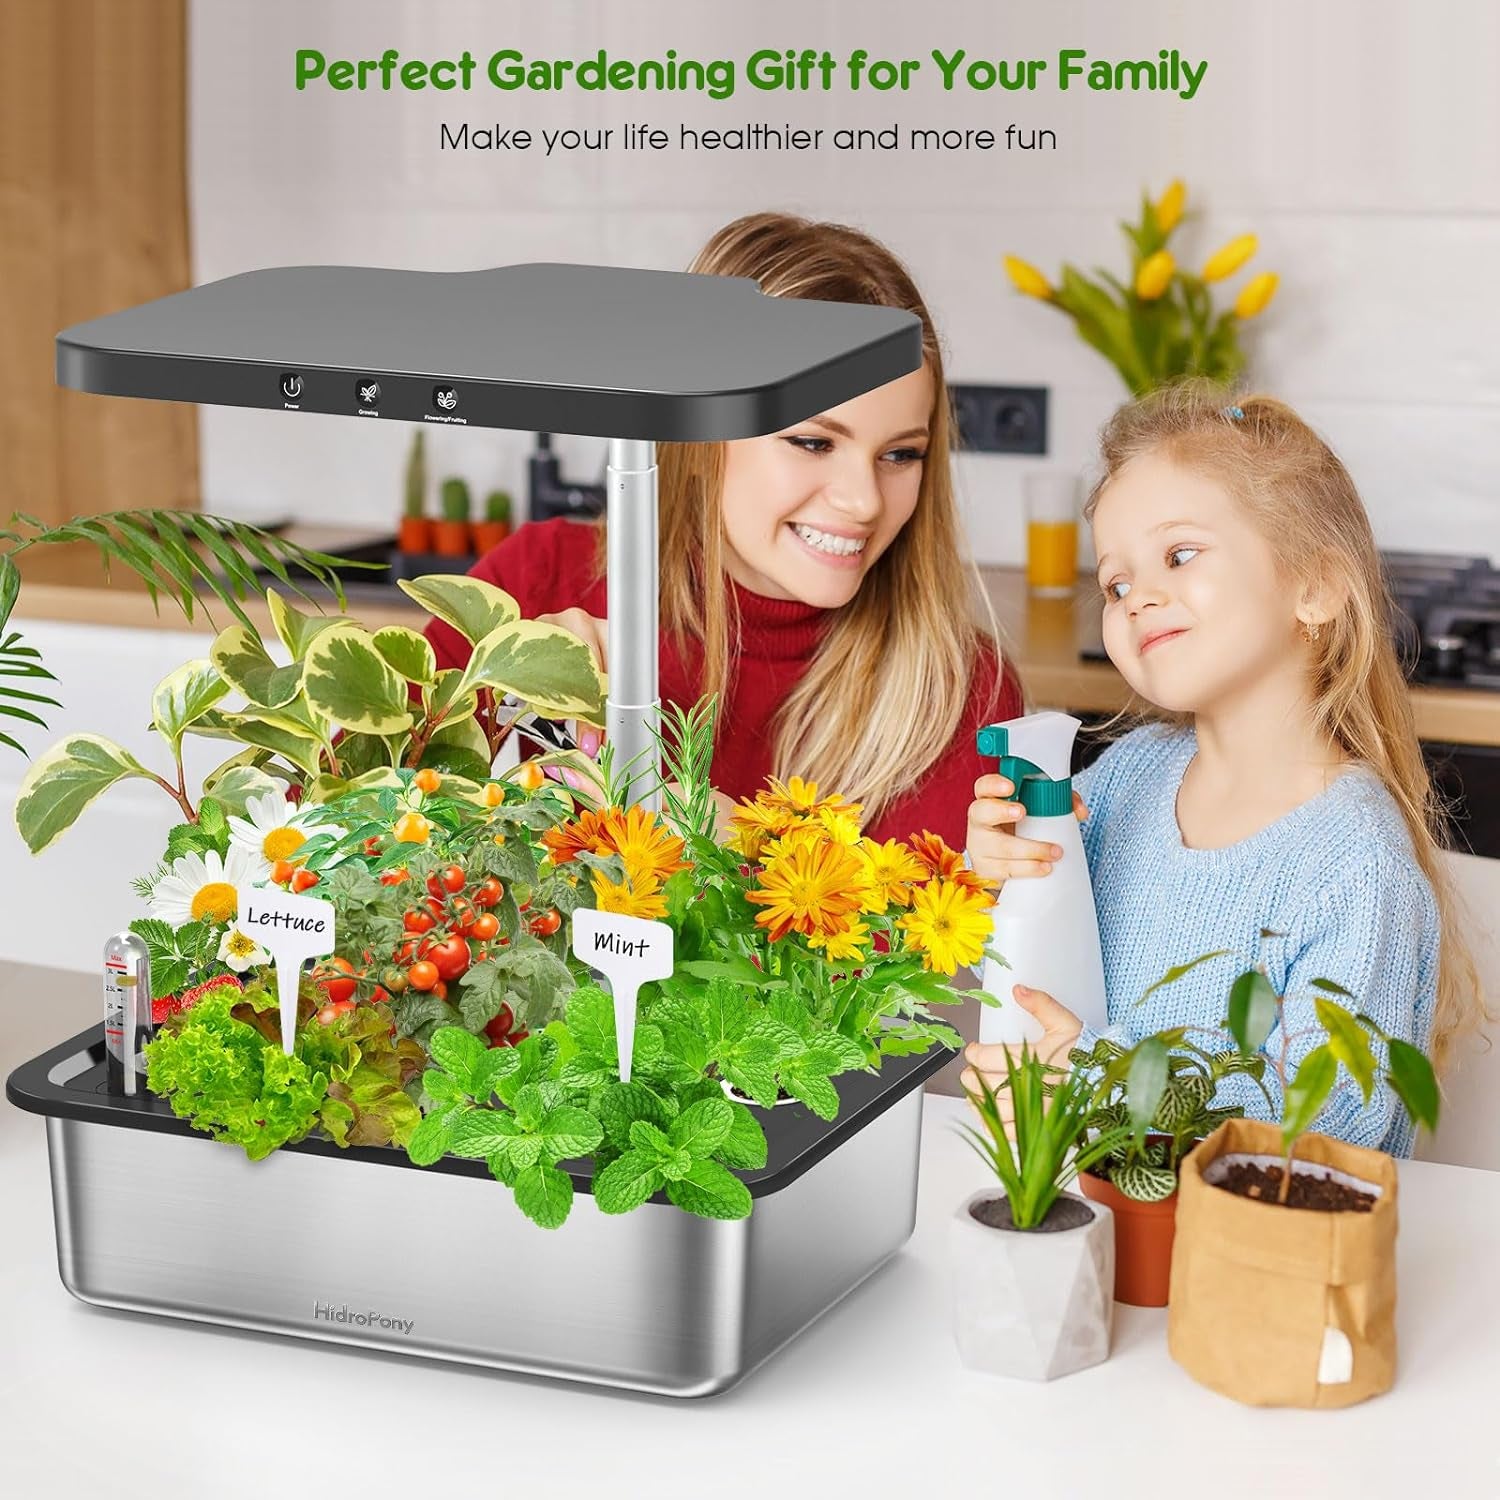 Hydroponics Growing System 15 Pods, Indoor Herb Garden with Grow Light, 304 Stainless Steel Indoor Garden Kit, Auto Timer, Gardening Gift for All Ages